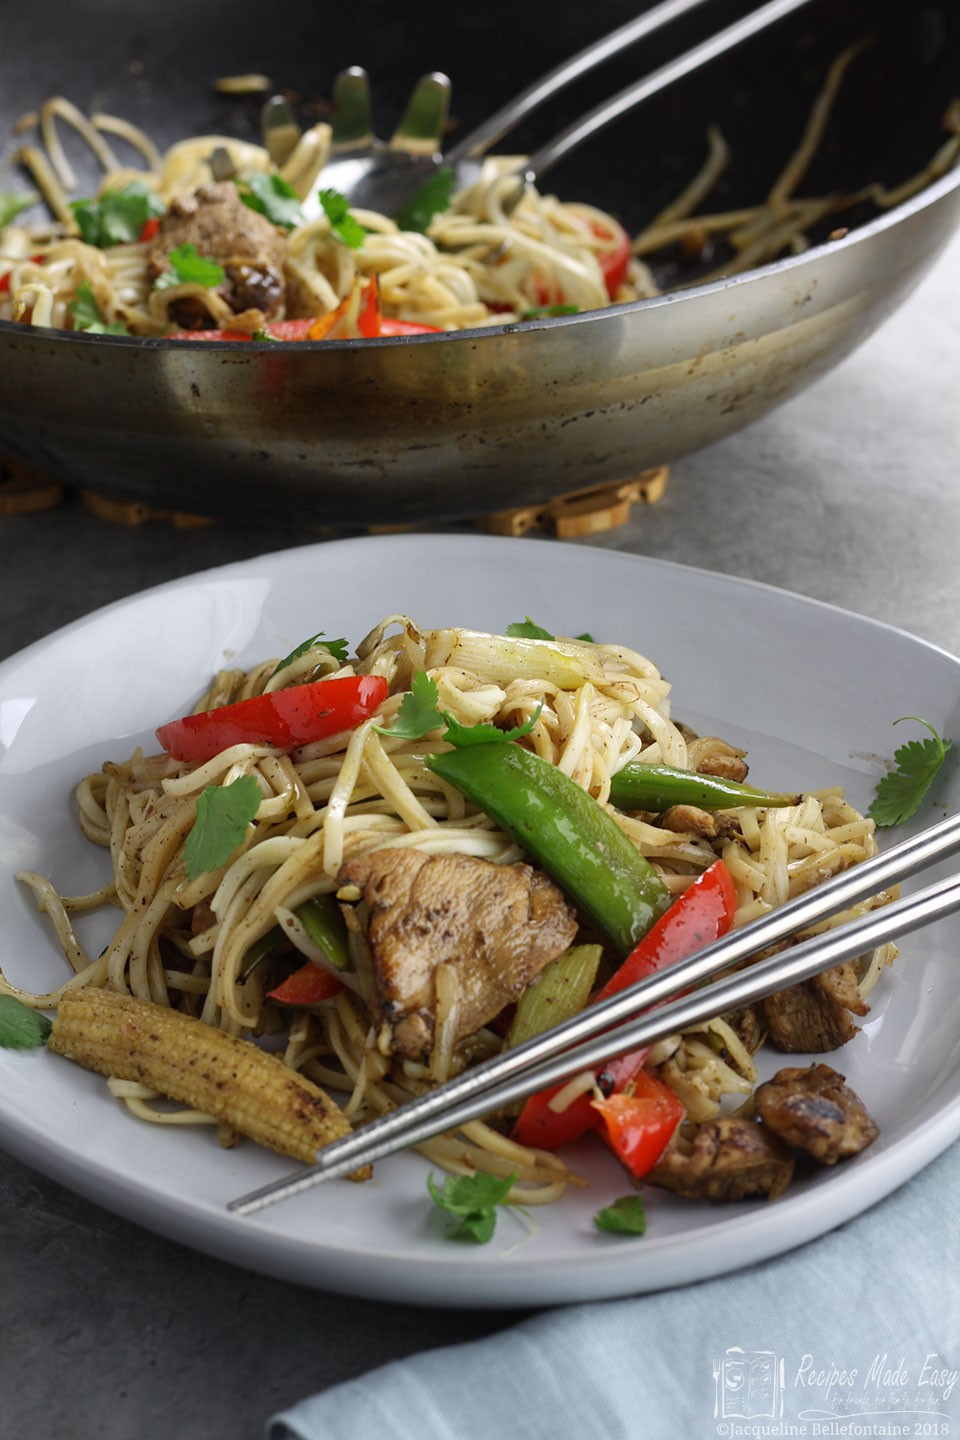 Easy Chicken Noodle Stir Fry - Recipes Made Easy